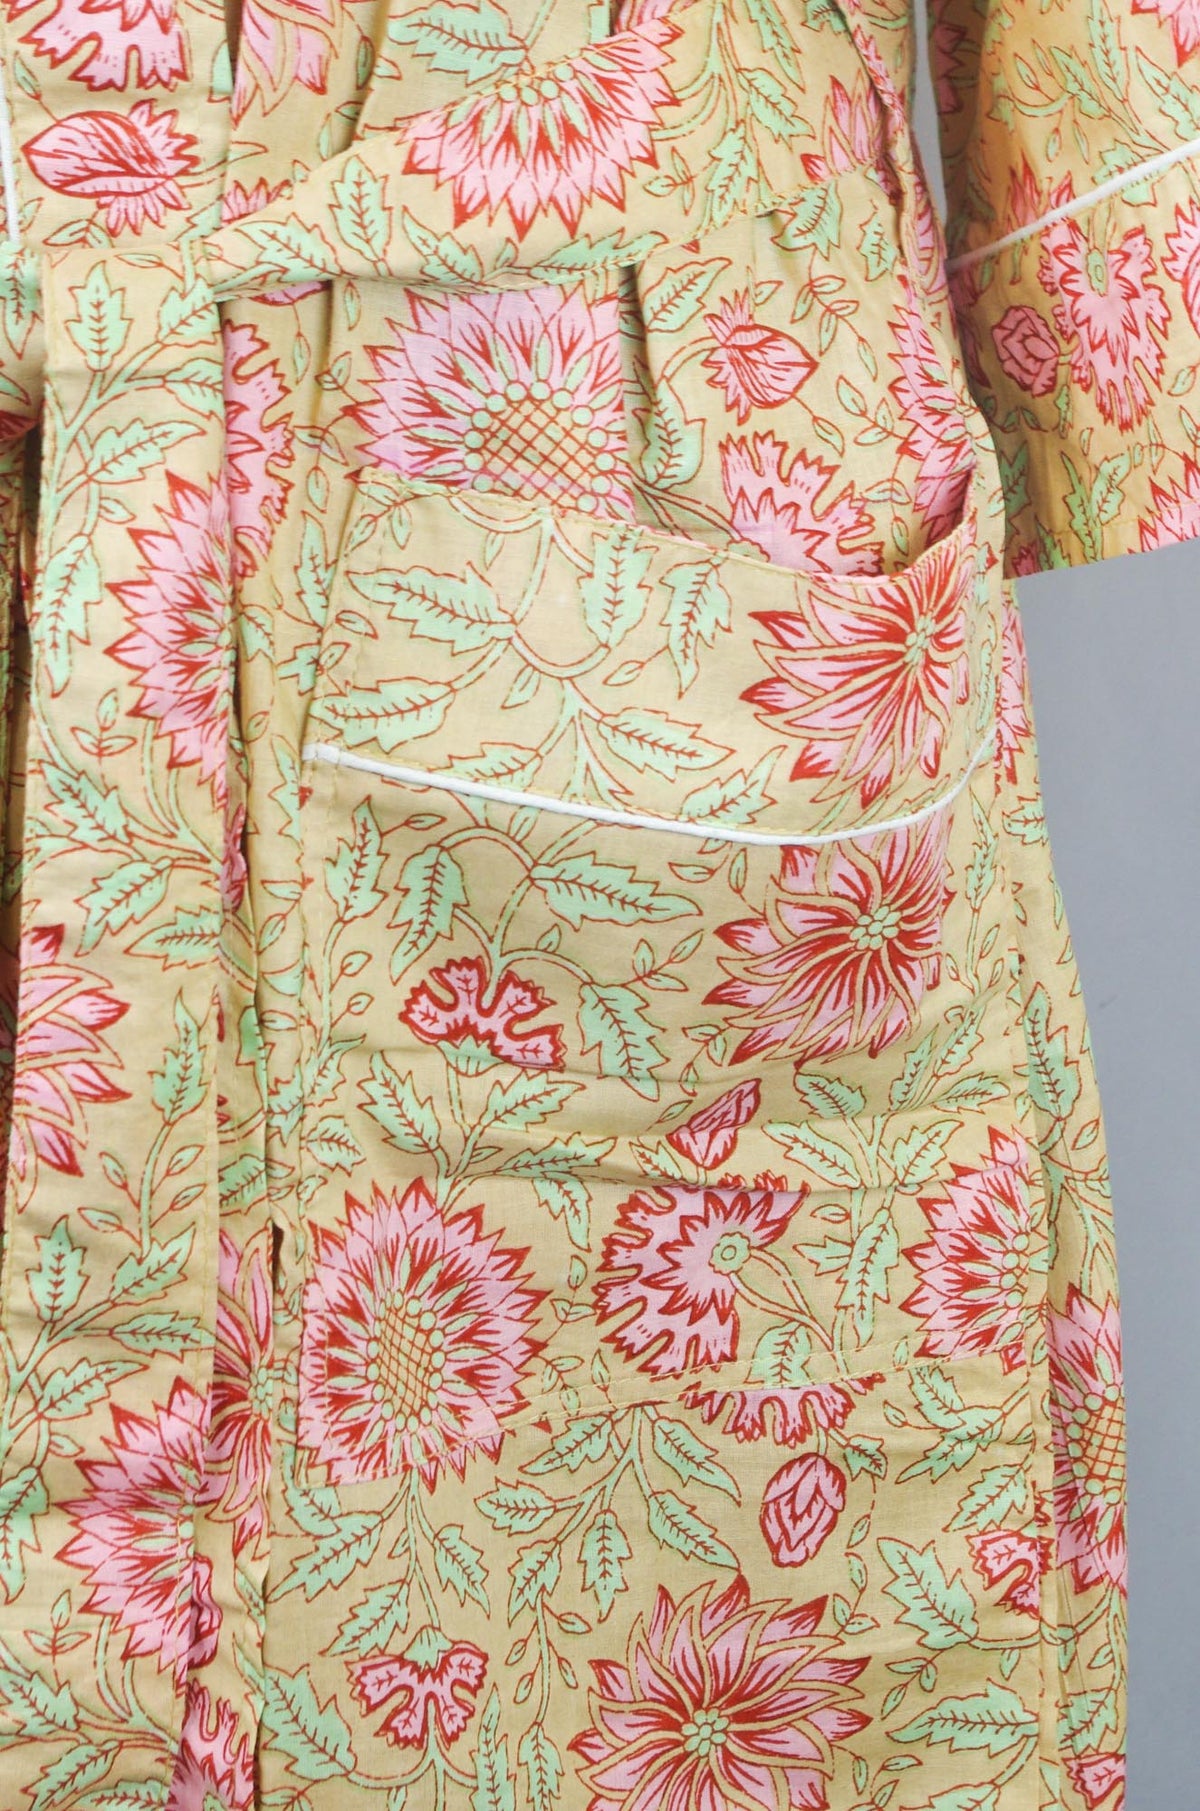 Pink Sunflowers On Beige Base Cotton Kimono Dressing Gown